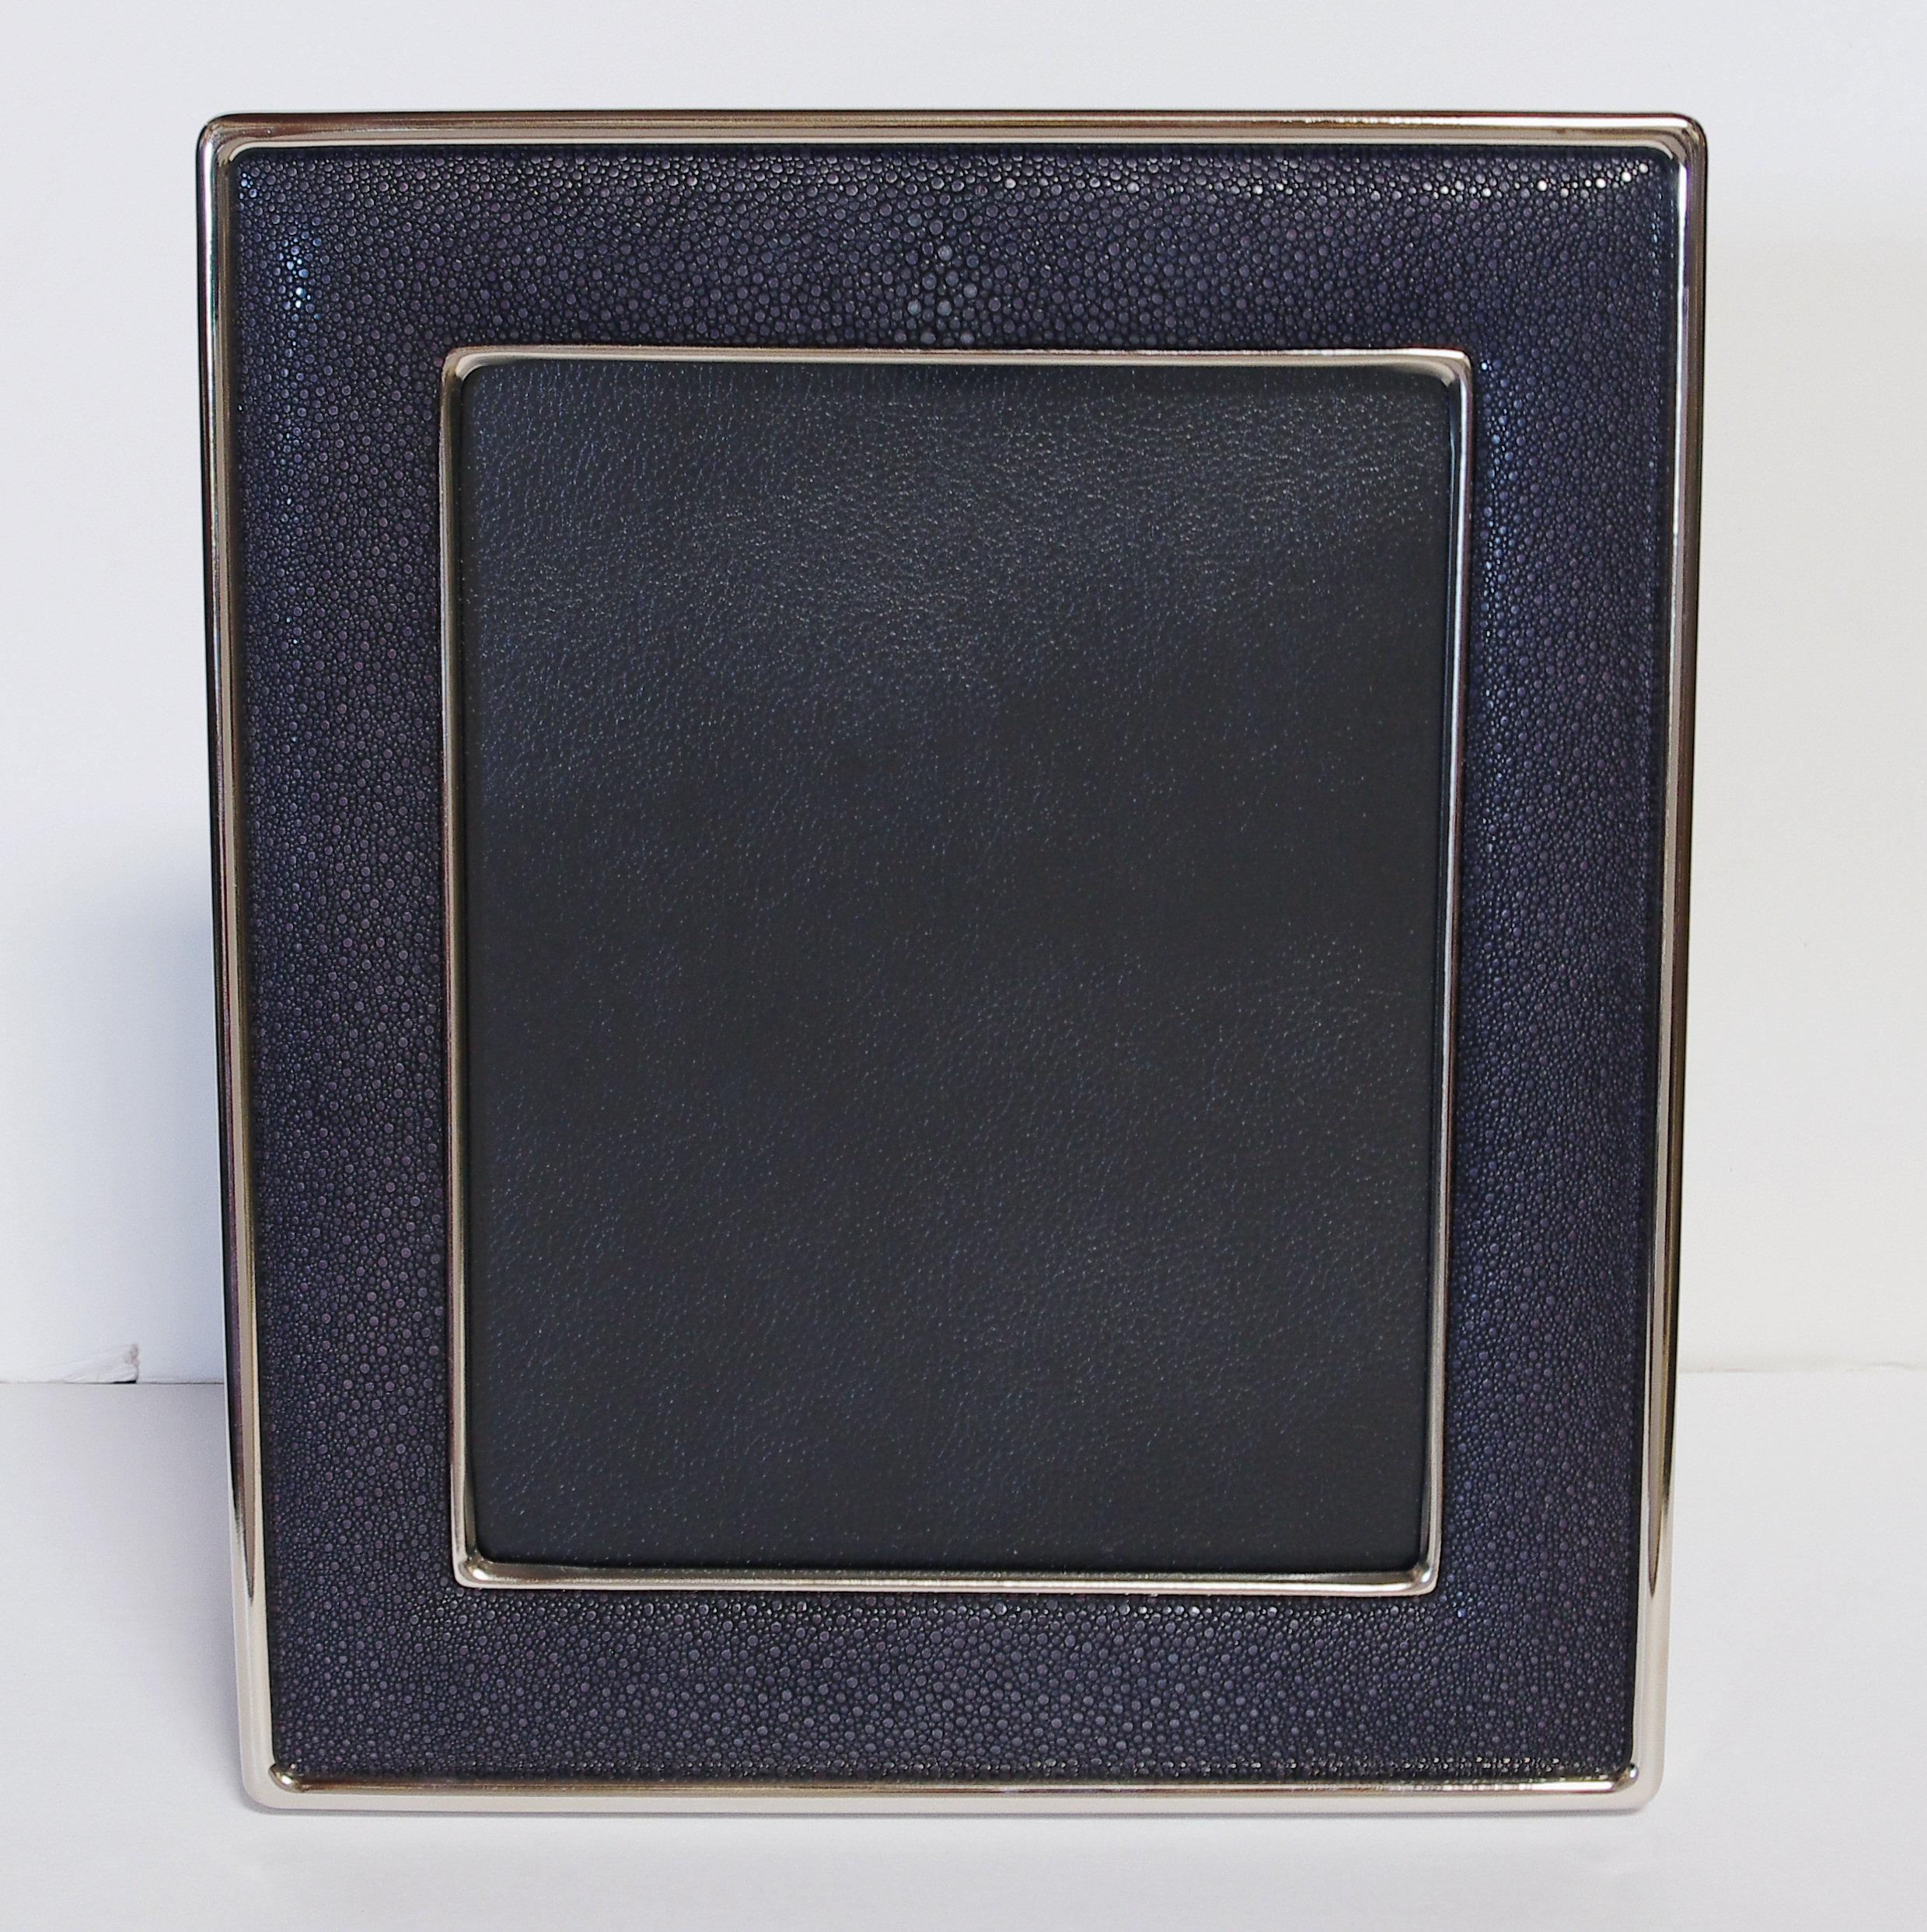 Black shagreen leather and nickel-plated frame with presentation black leather box by Fabio Ltd
Height: 13 inches / Width: 11.5 inches / Depth: 1 inch 
Photo size: 8 inches by 10 inches
LAST 1 in stock in Los Angeles
Order Reference #: FABIOLTD